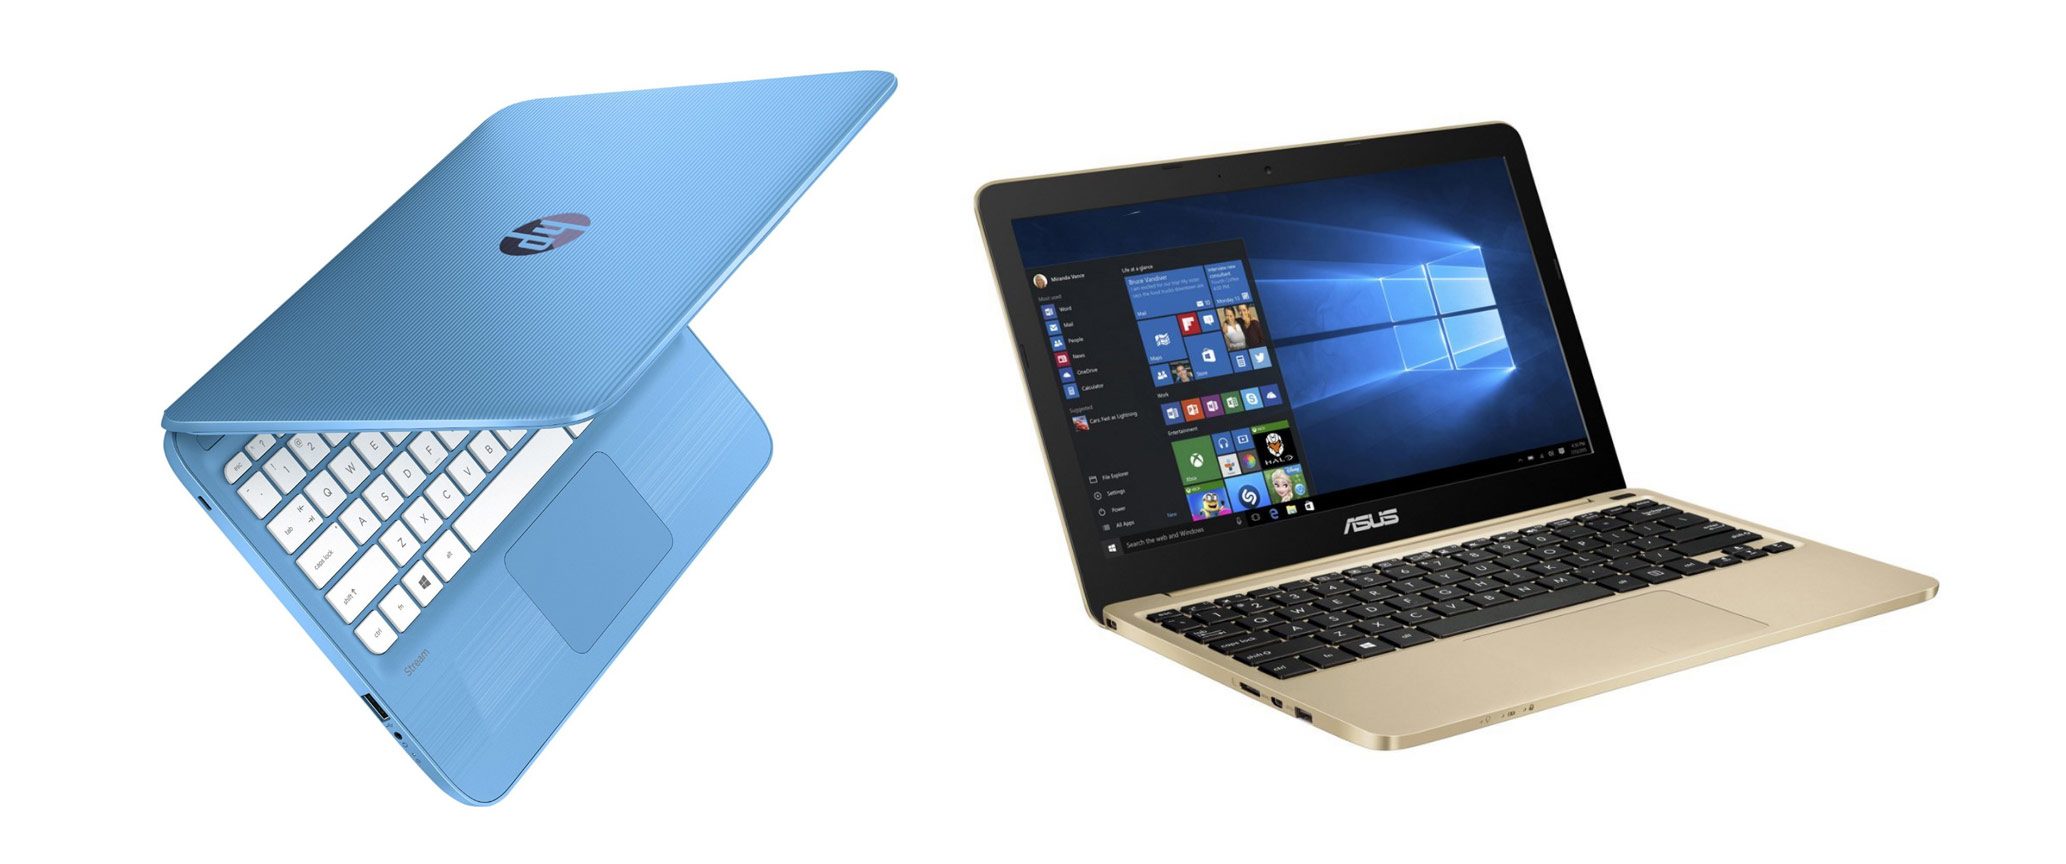 The HP Stream 11 and the Asus Vivobook E200 are excellent Windows small laptops you can have for under $200